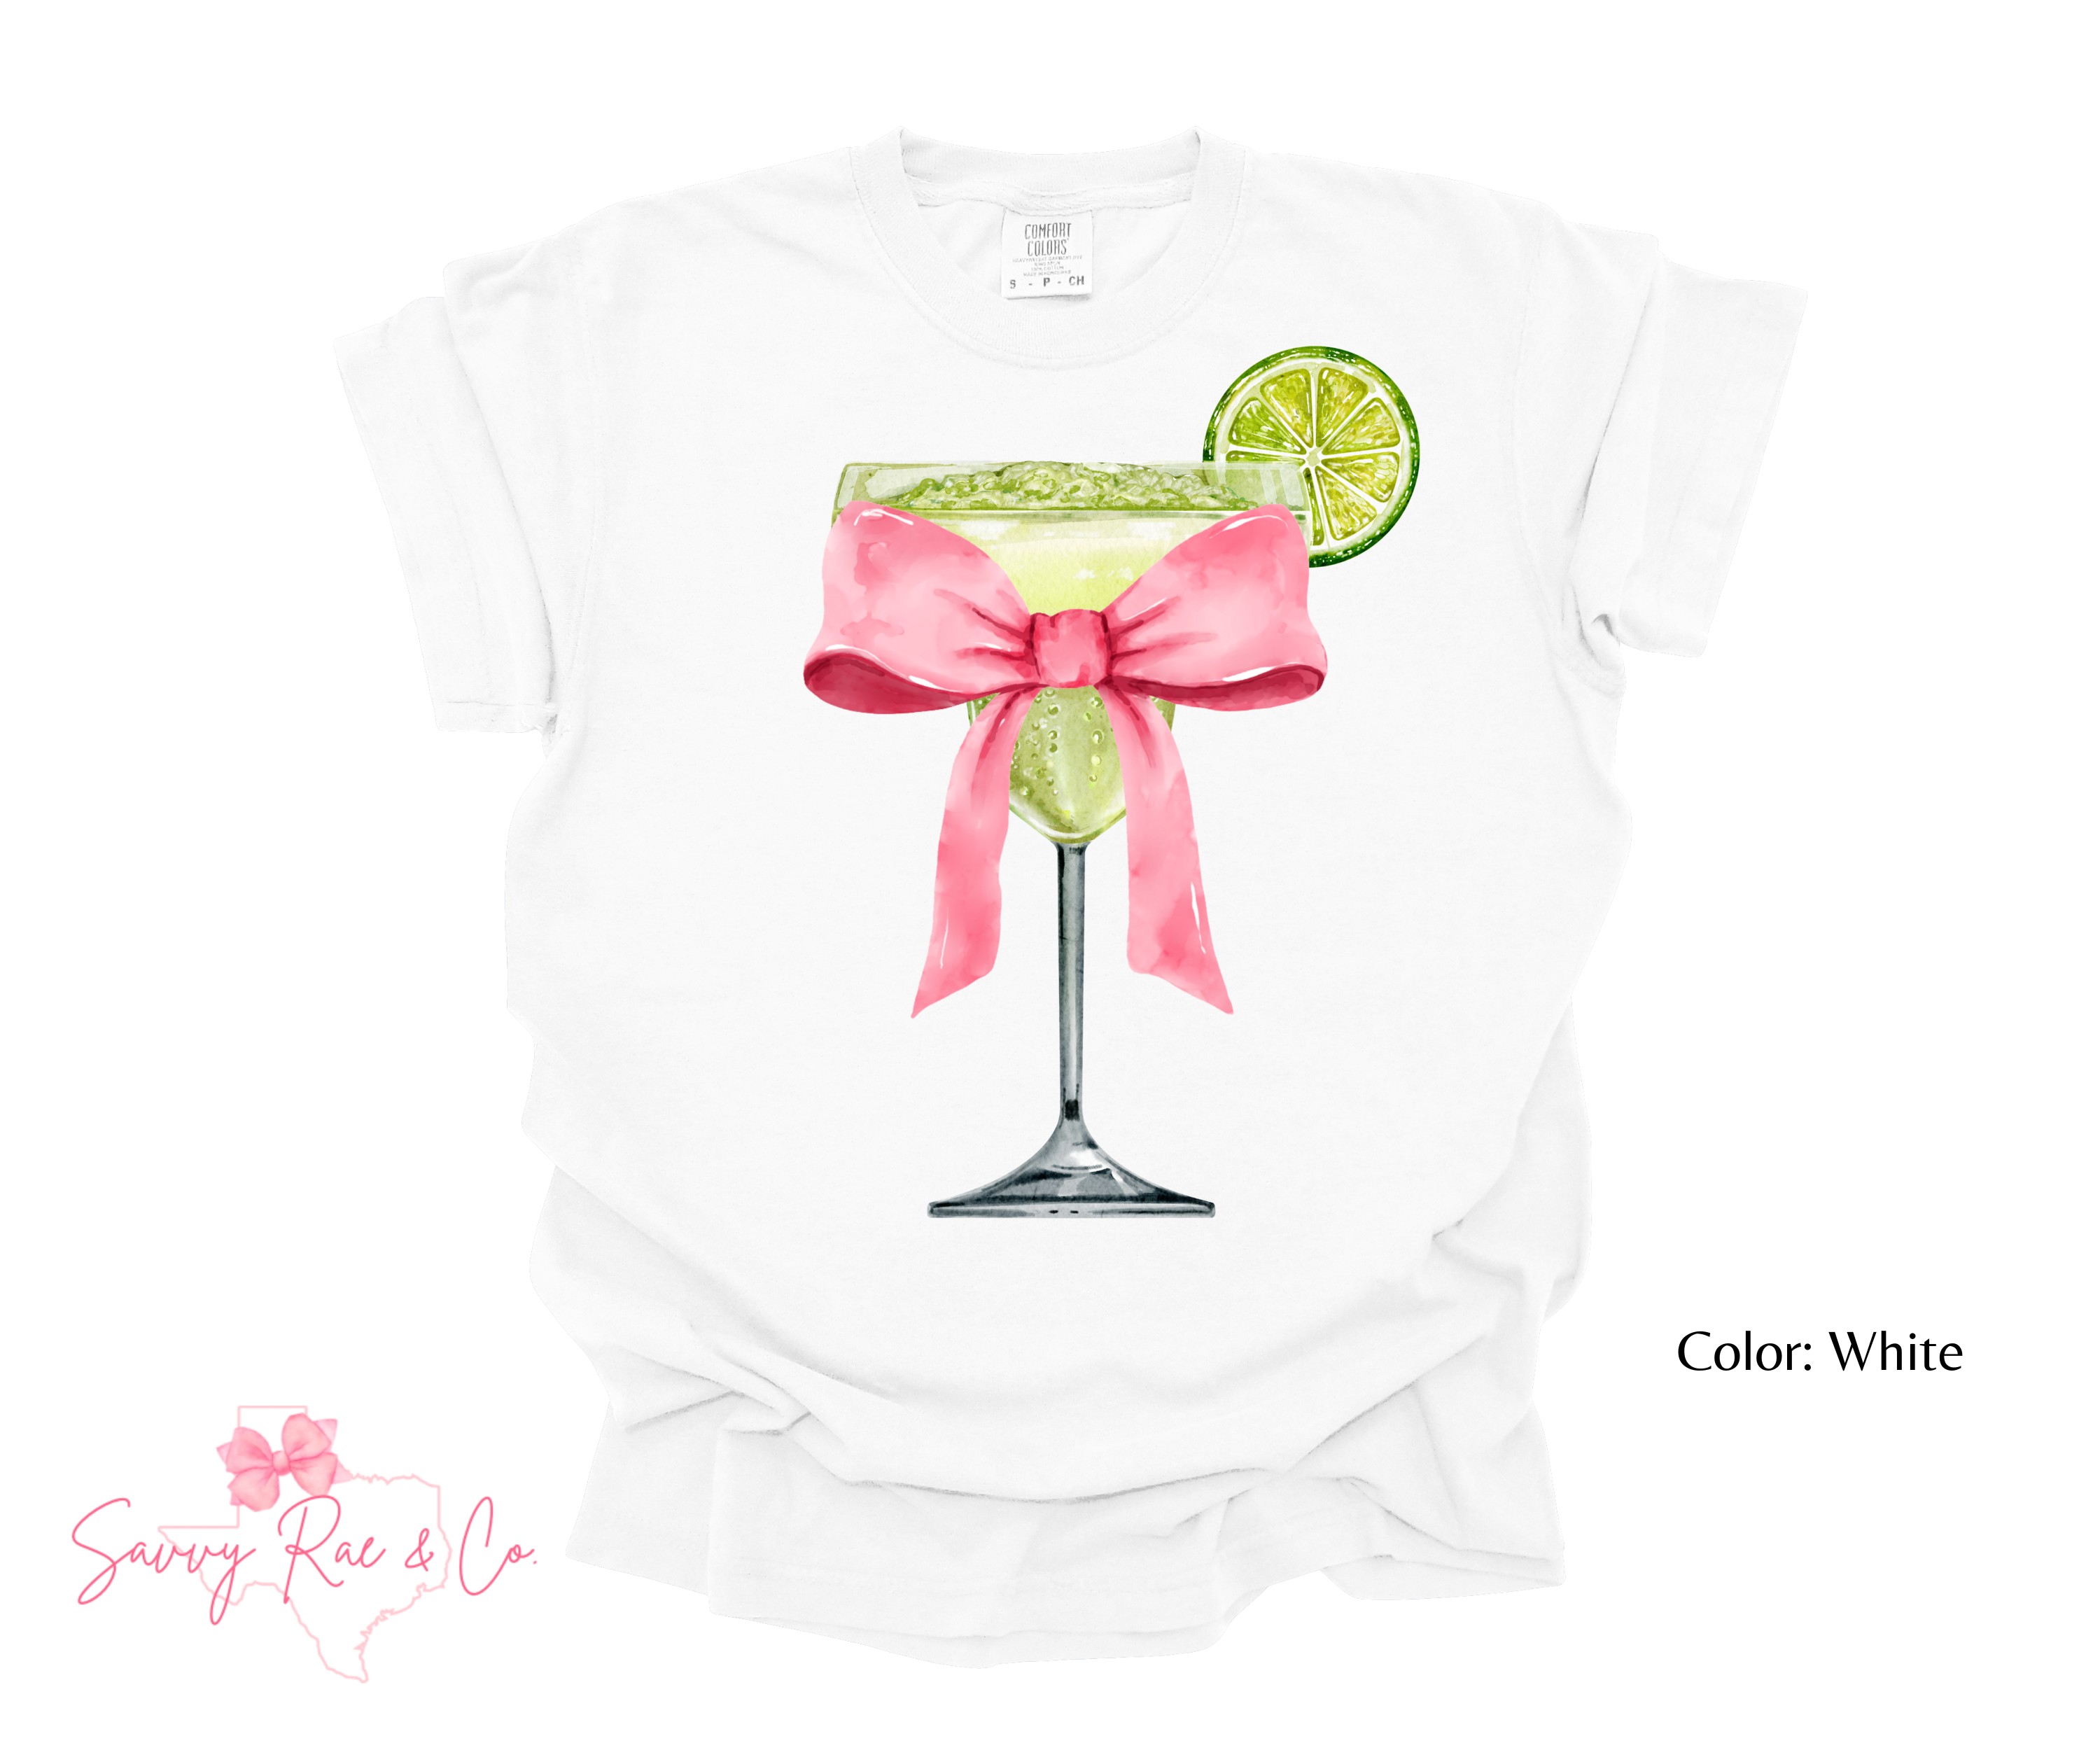 Drink Coquette Comfort Color Shirts